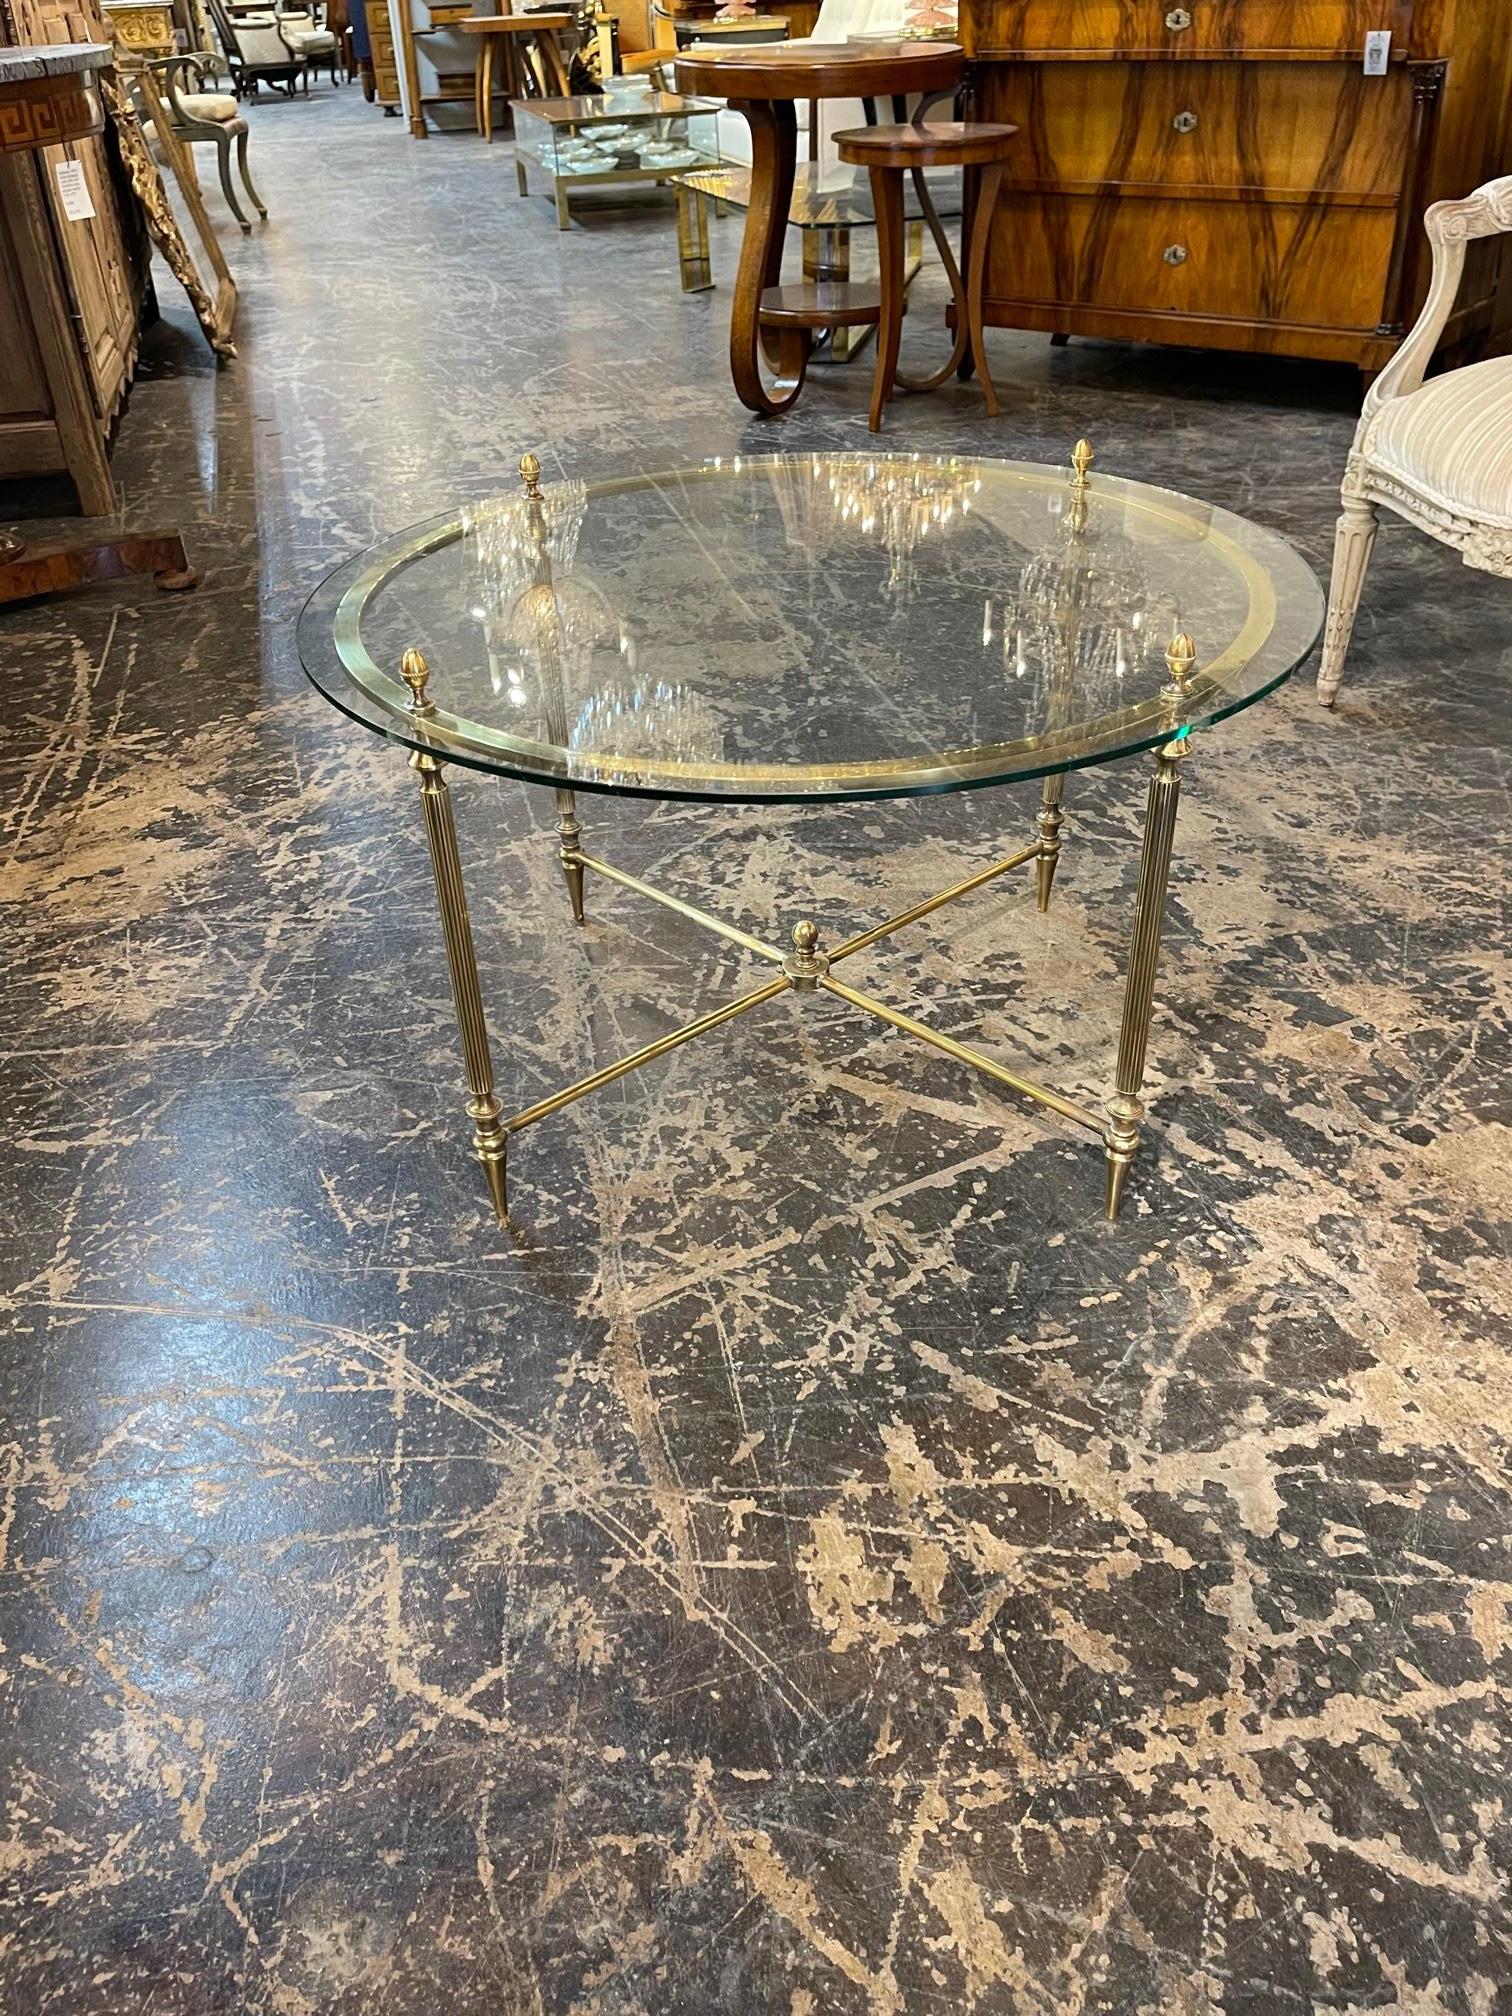 Vintage English polished brass round coffee table Circa 1940. It's a stunning little coffee table.